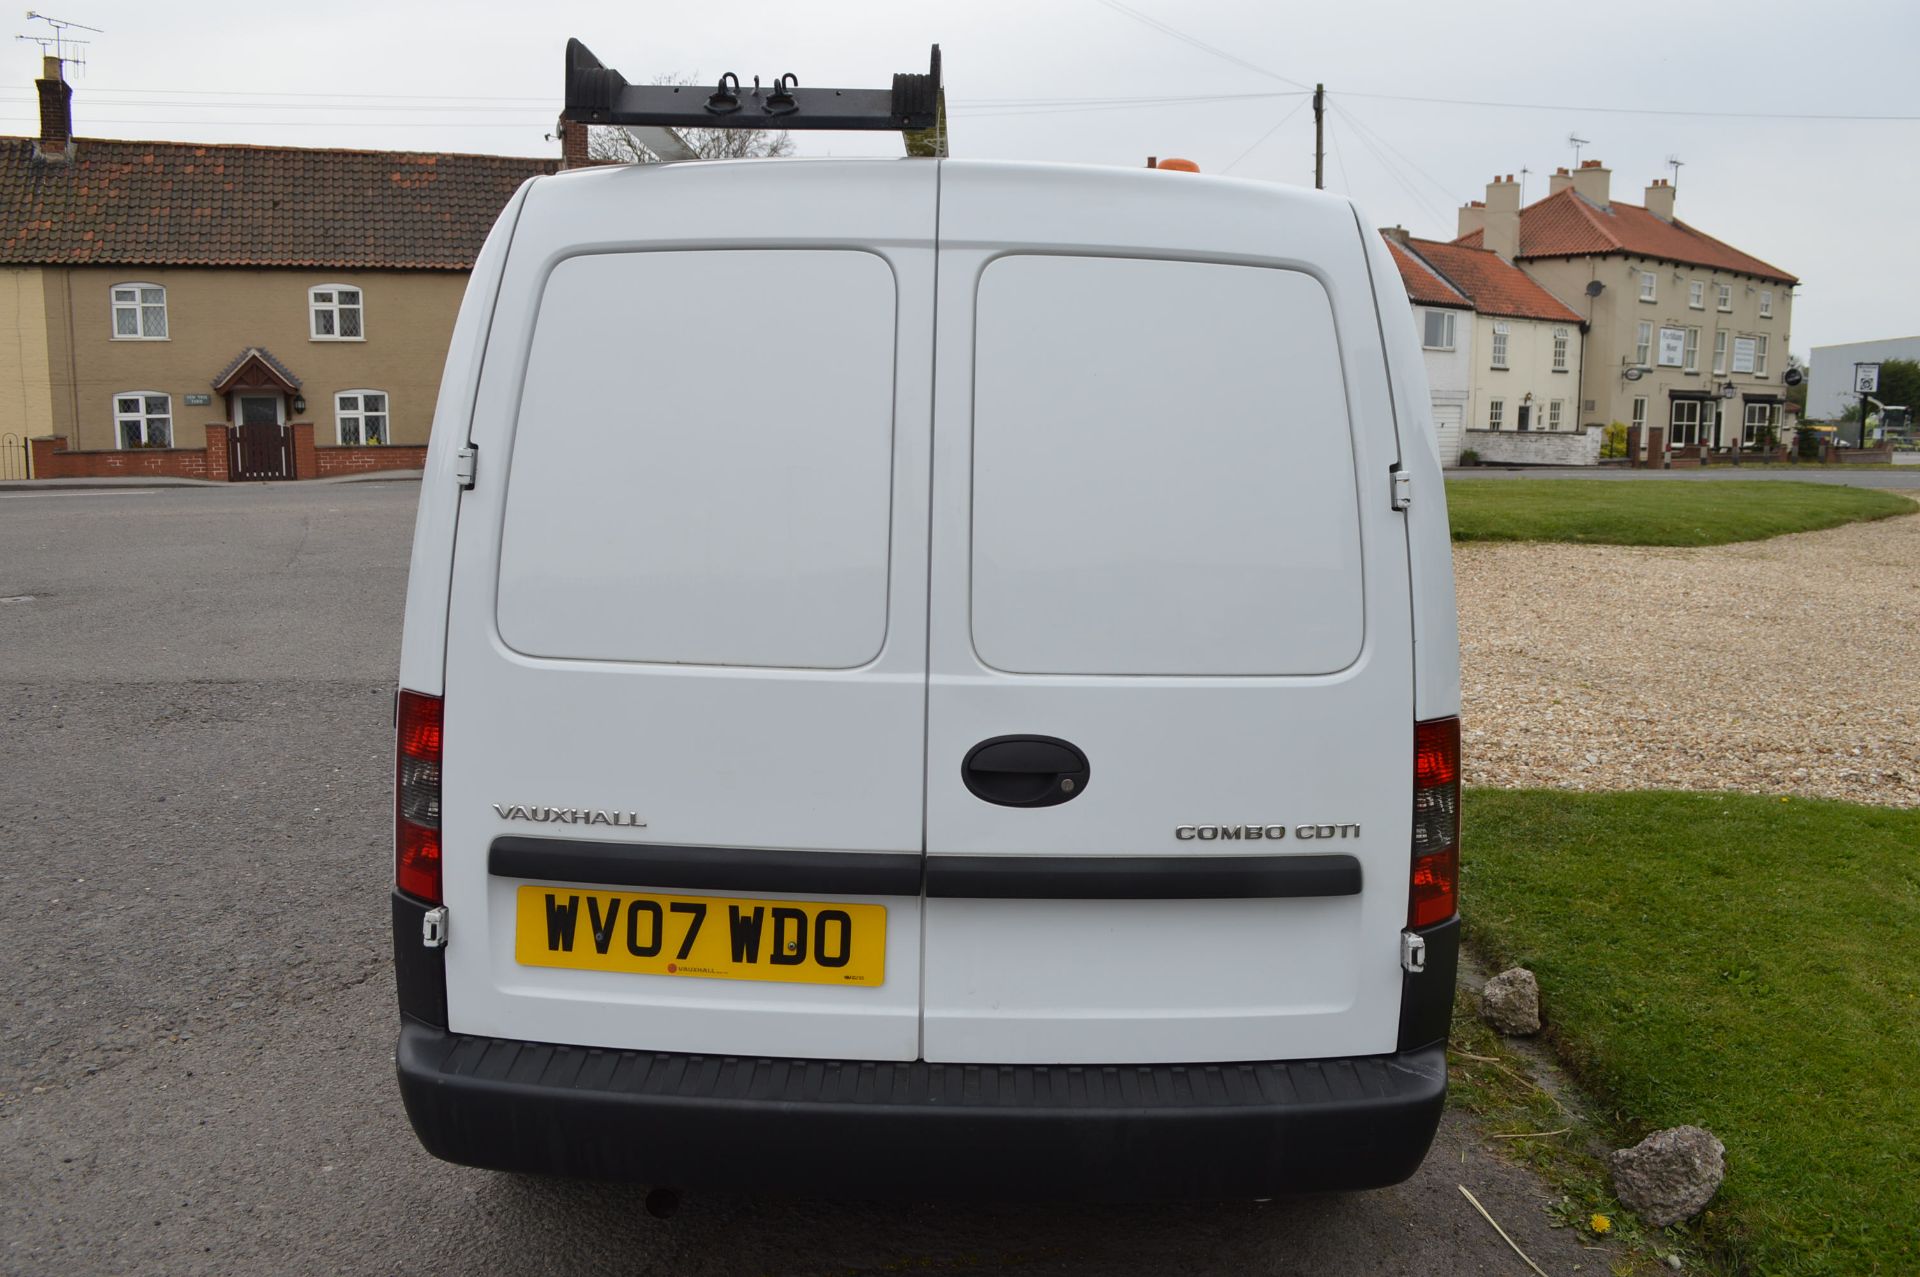 KB - 2007/07 REG VAUXHALL COMBO 2000 CDTI, SHOWING 1 OWNER   DATE OF REGISTRATION: 14TH MARCH 2007 - Image 5 of 17